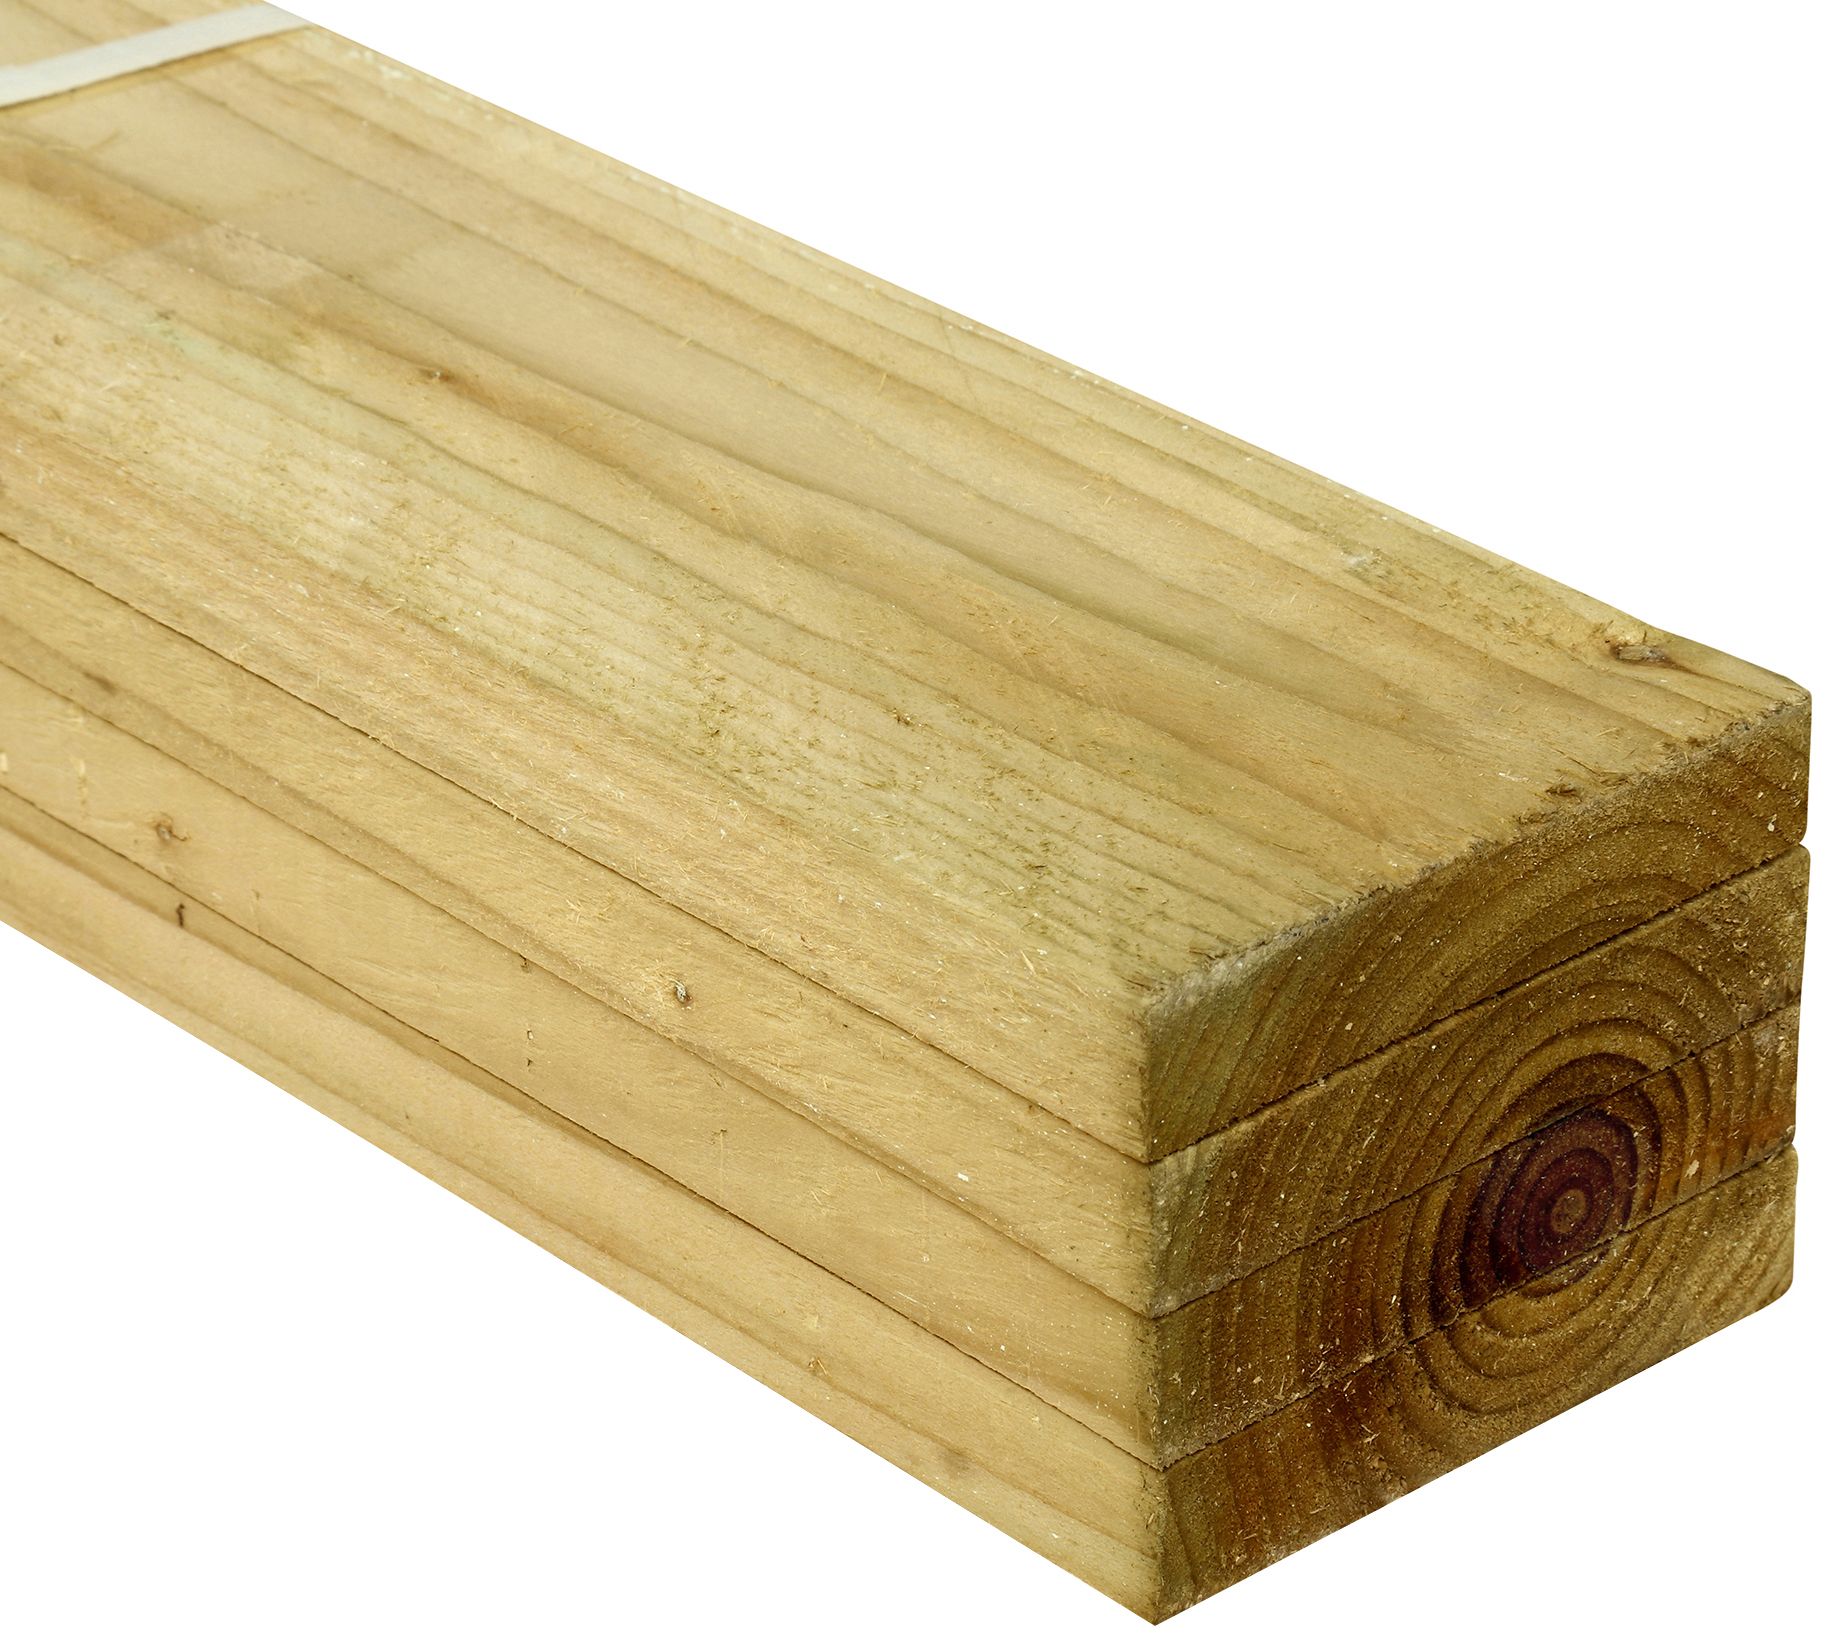 Image of Wickes Treated Sawn Timber - 22 x 100 x 2400mm - Pack 4